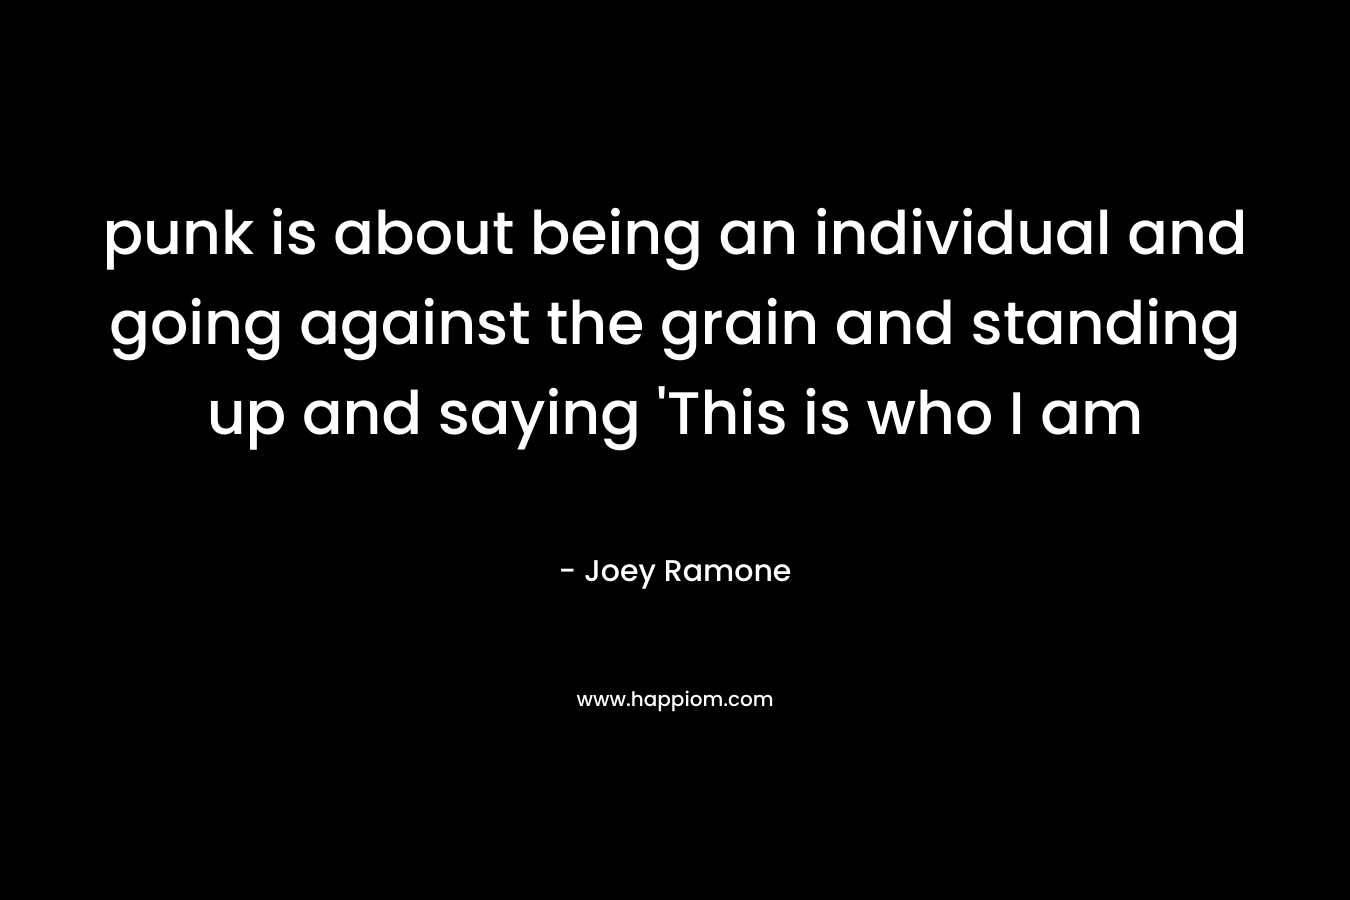 punk is about being an individual and going against the grain and standing up and saying ‘This is who I am – Joey Ramone